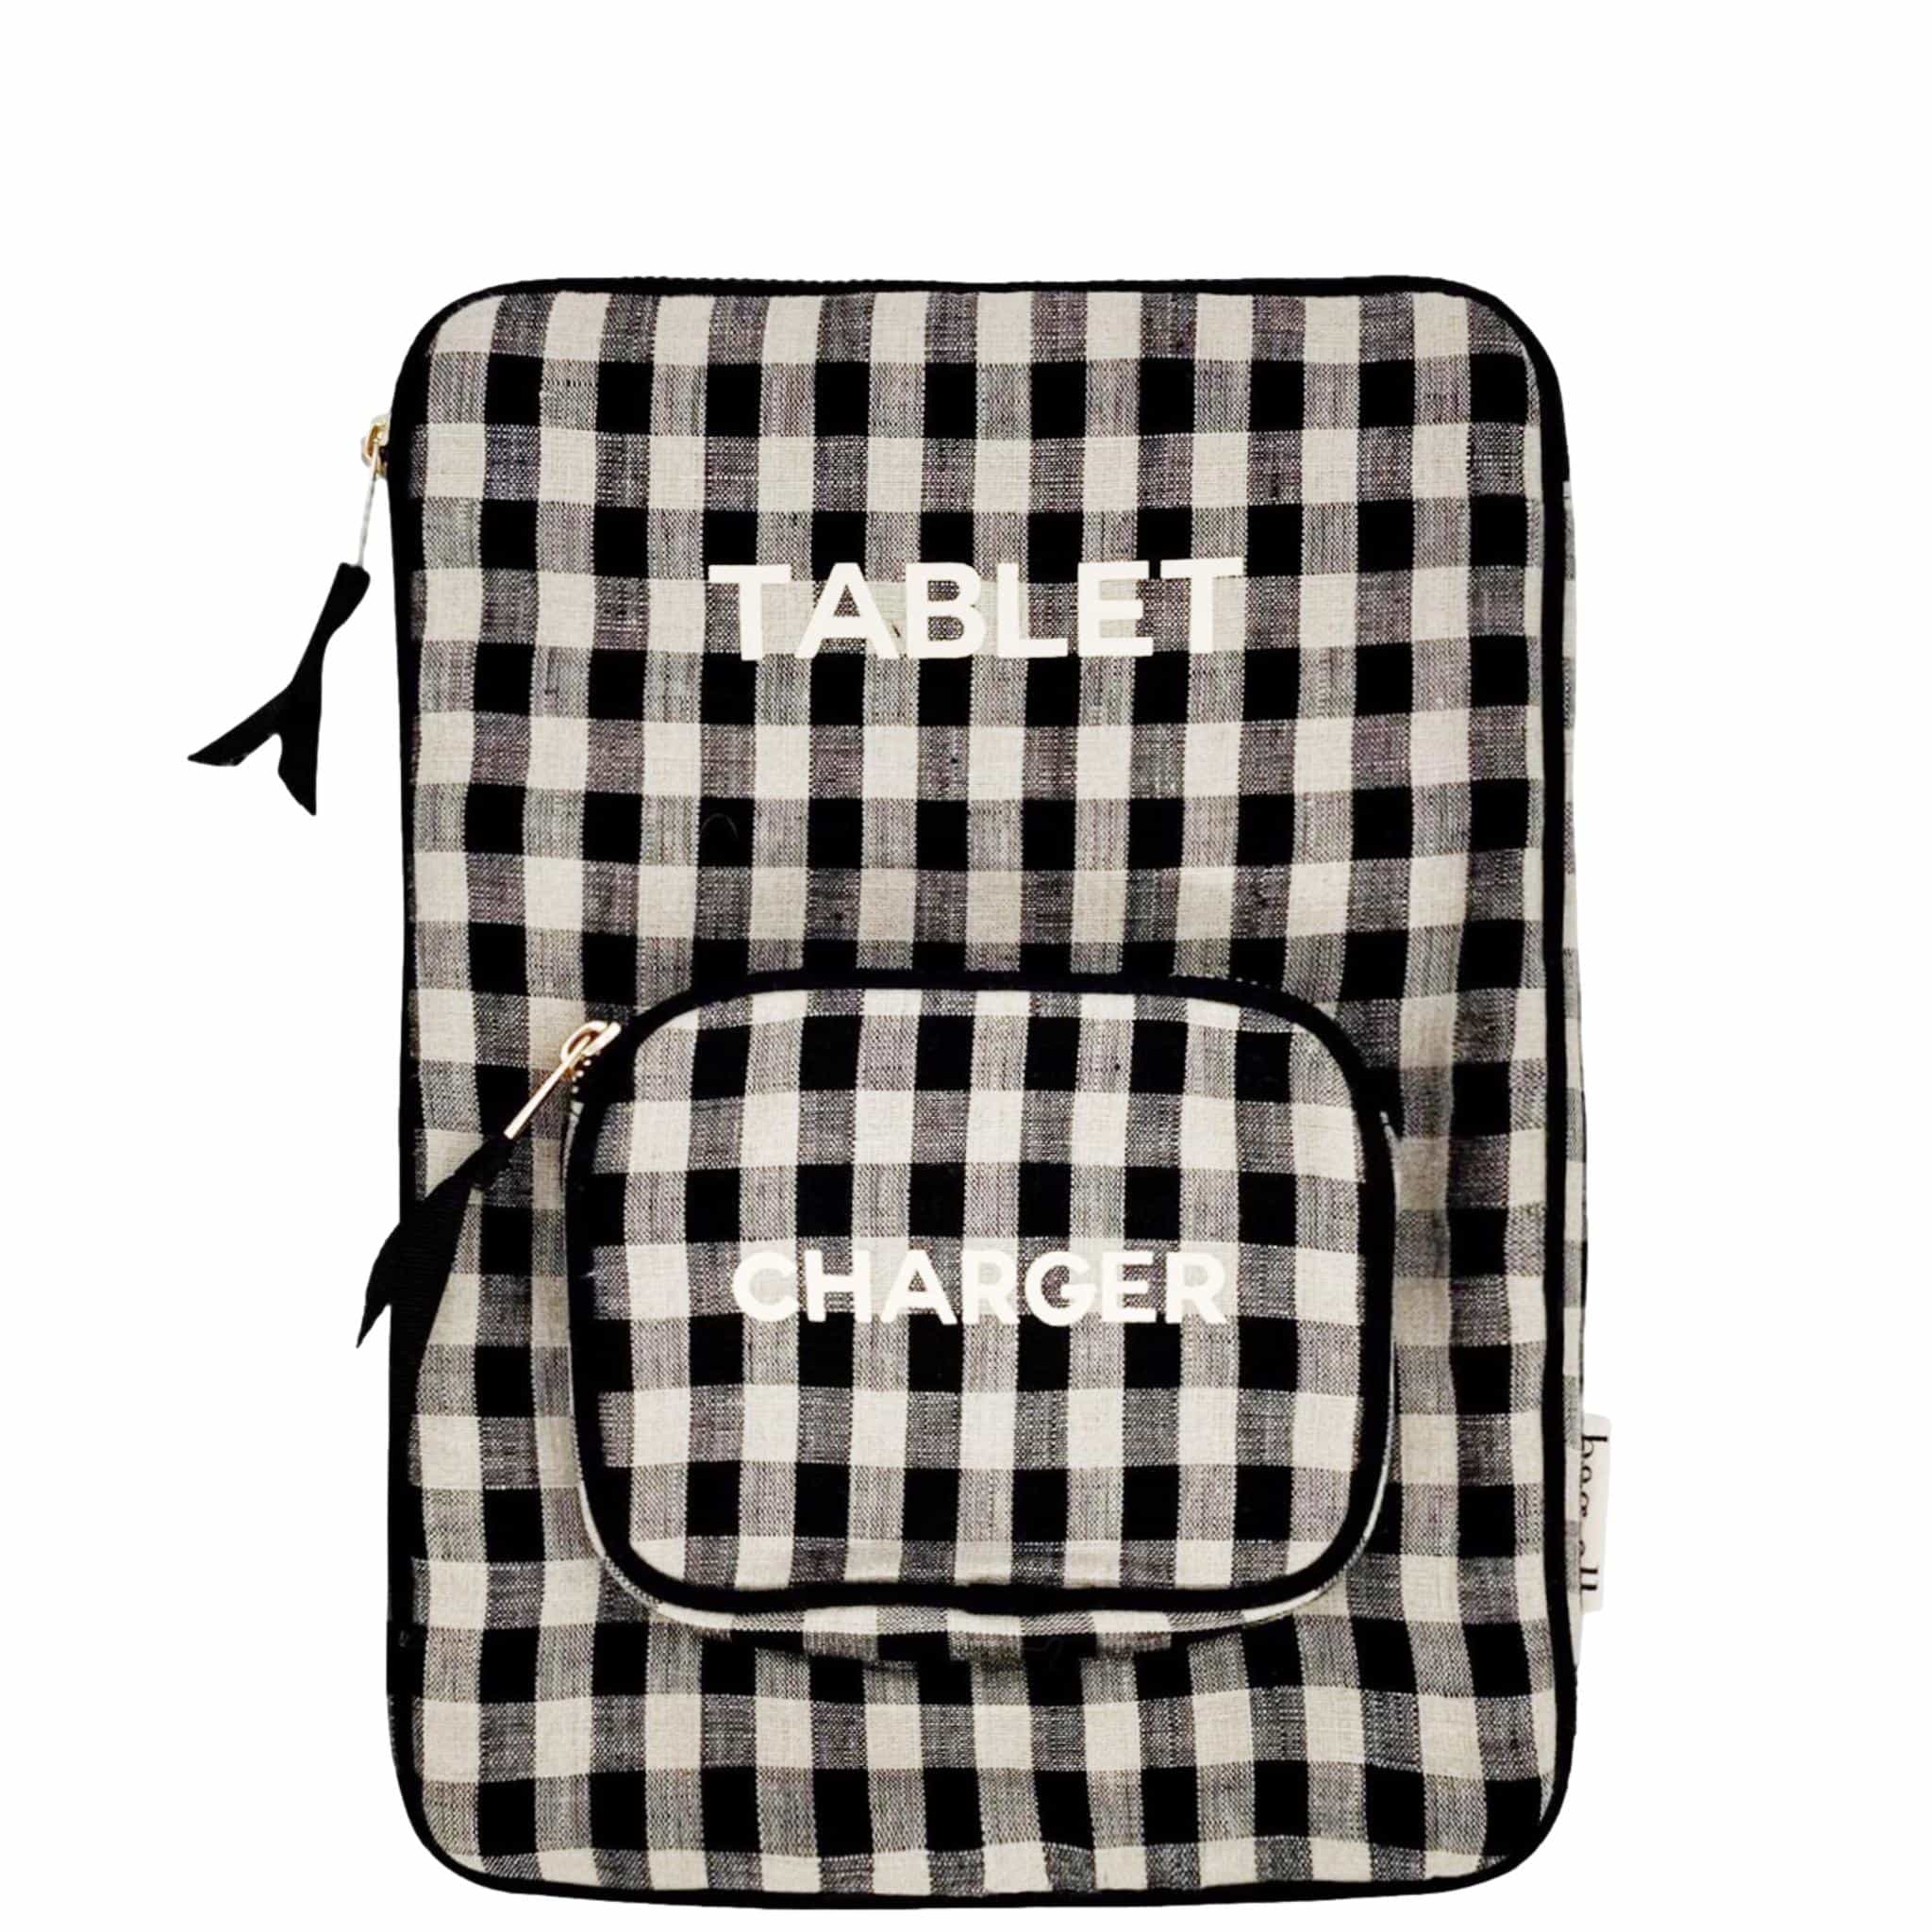 Tablet Sleeve/Pouch in gingham linen for ipad. 